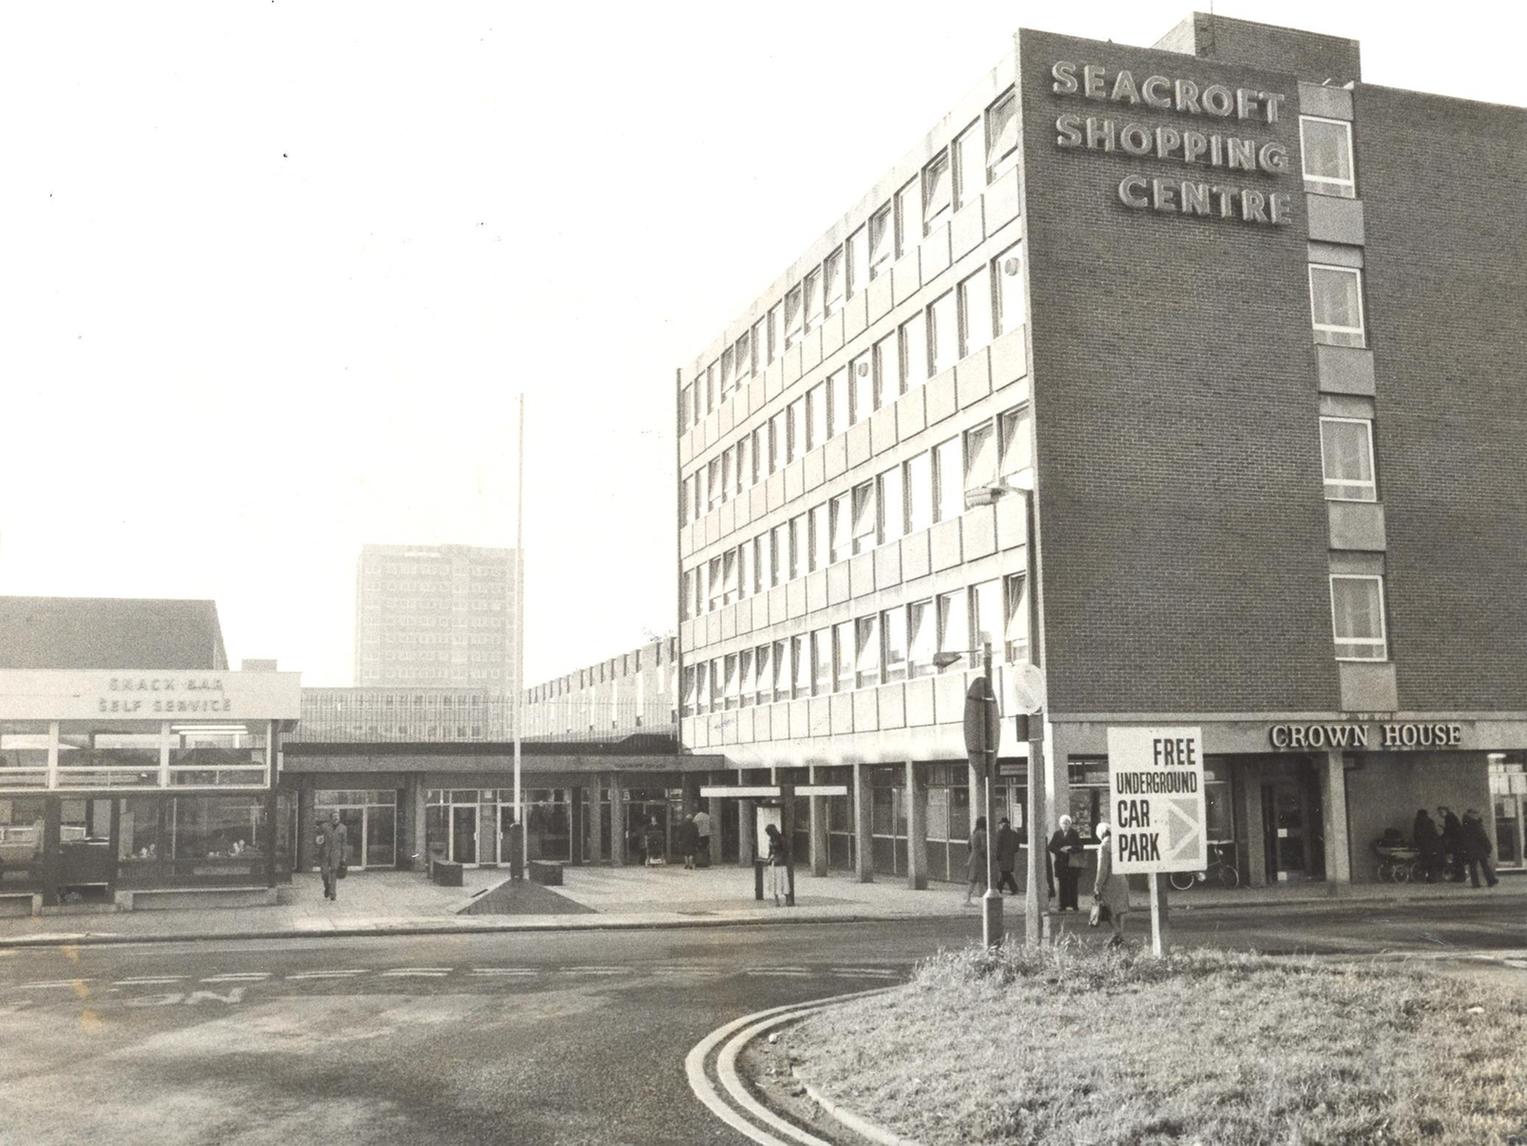 Seacroft Shopping Centre with its 'free undergound car park'